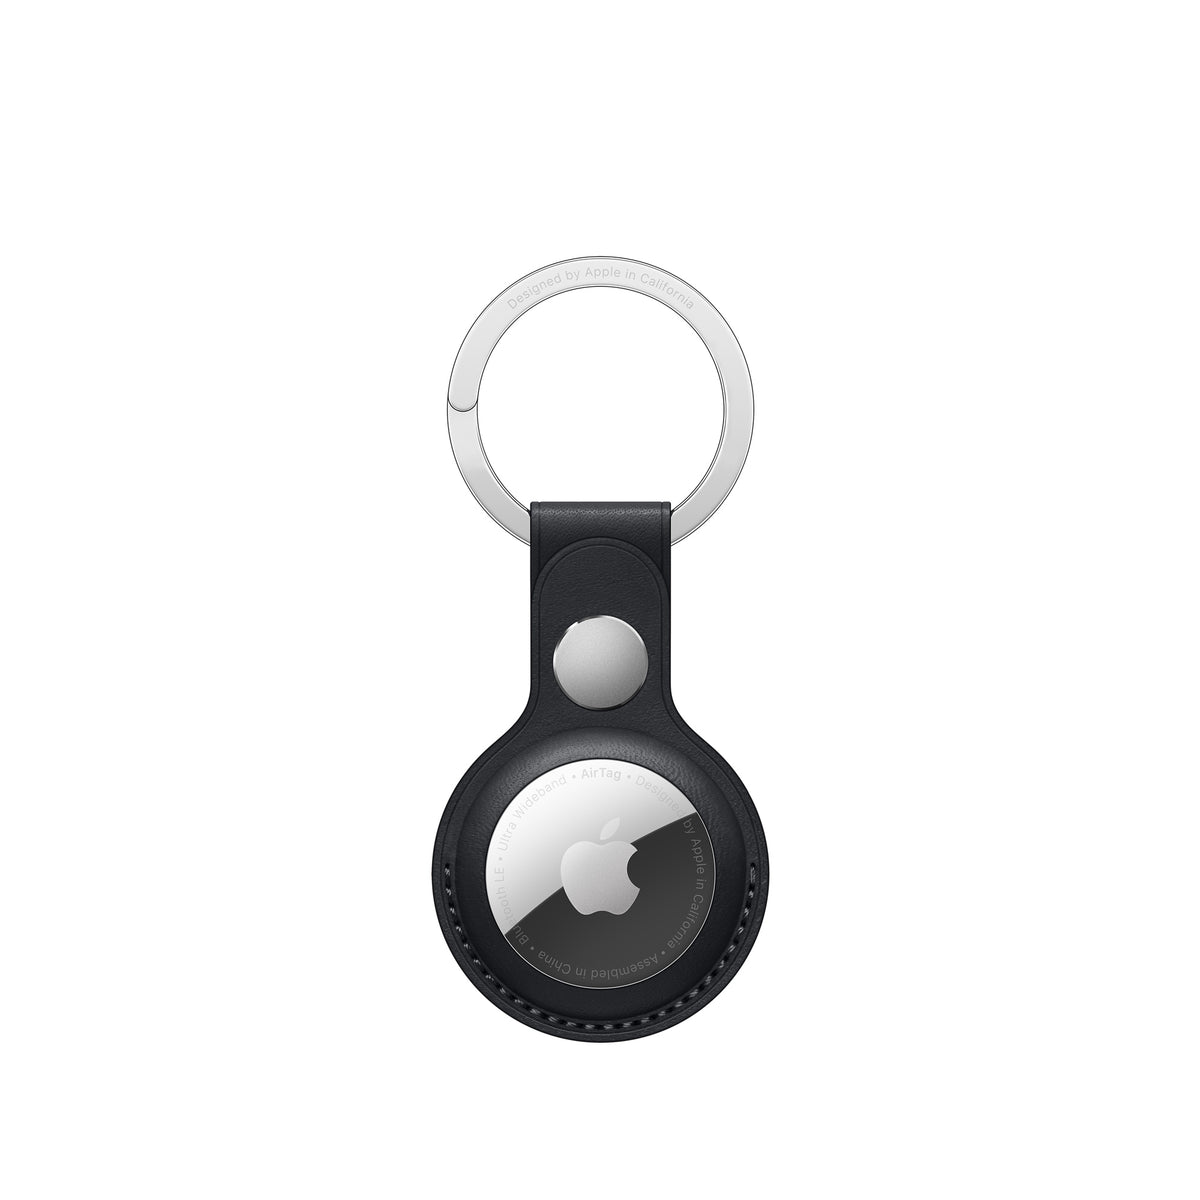 Apple AirTag Leather Key Ring